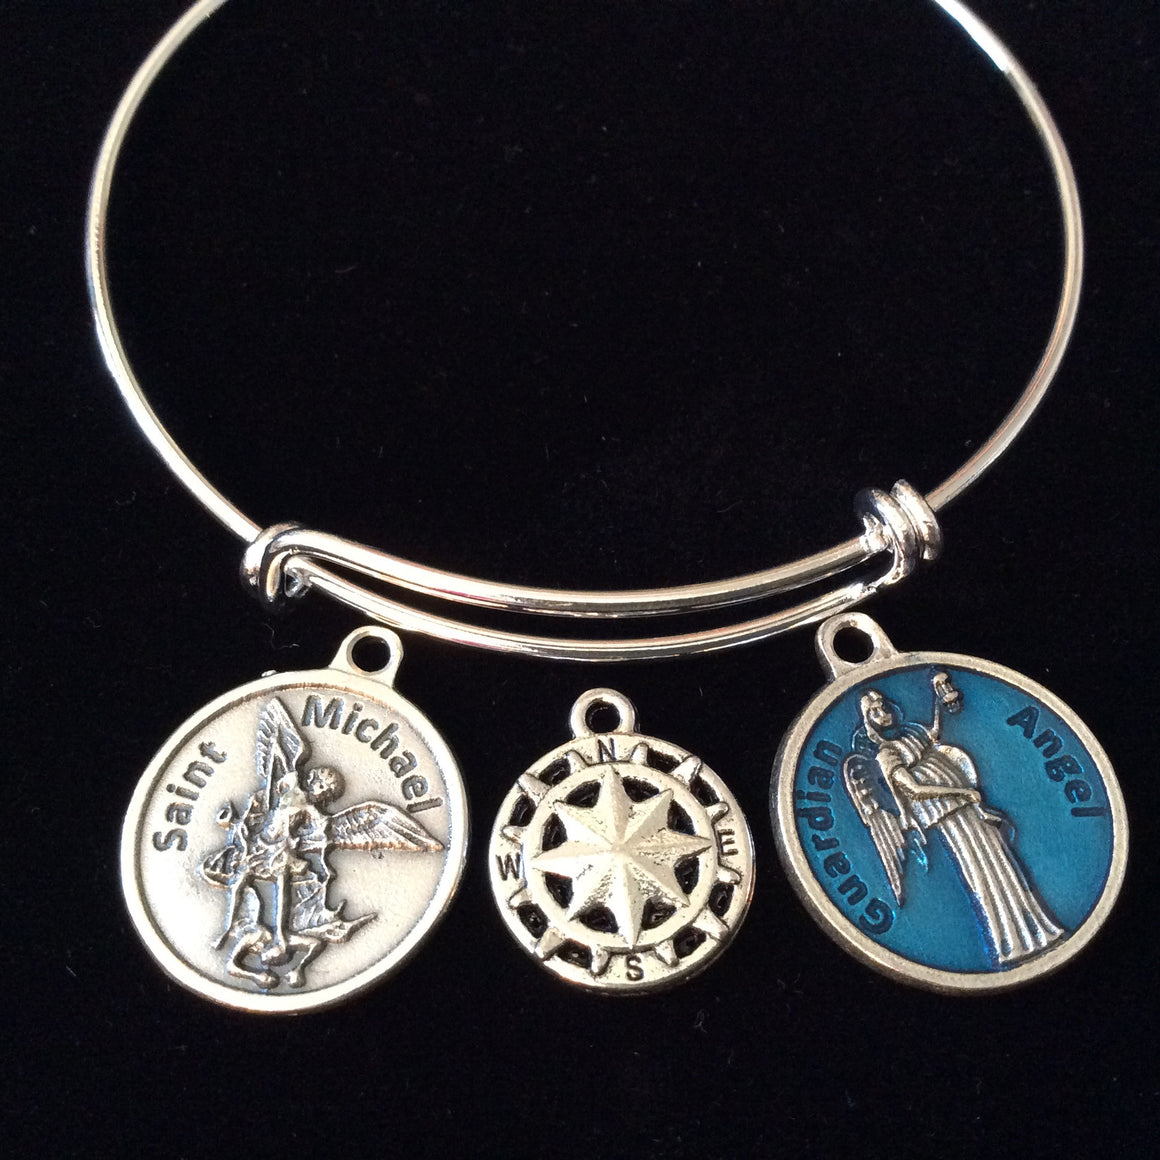 Saint Michael with Compass and Guardian Angel Charm Silver Expandable Bracelet Adjustable Wire Bangle Inspirational Jewelry Trendy Gift